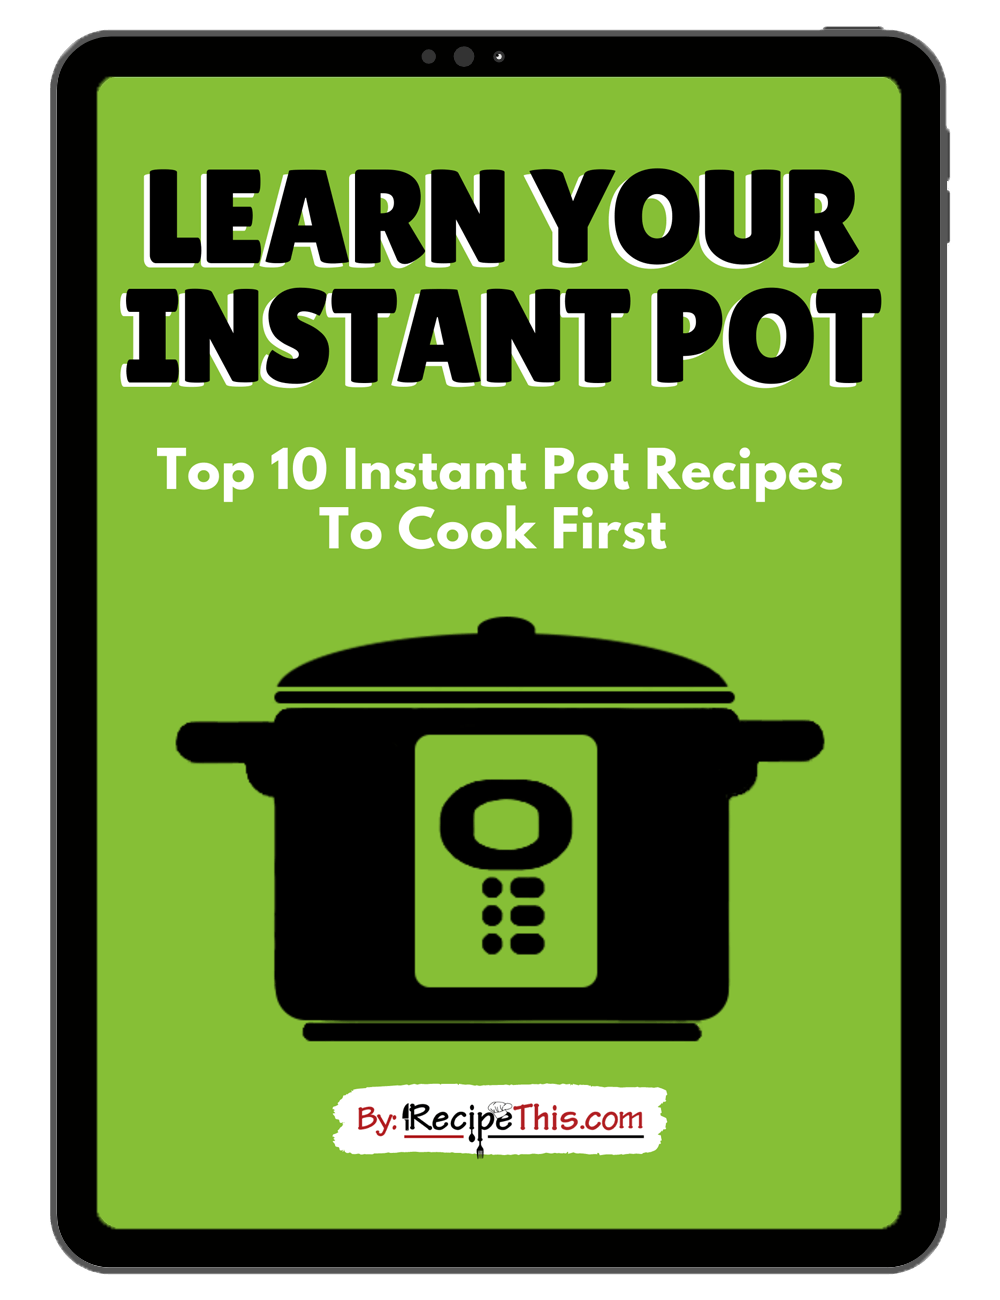 What Is an Instant Pot? Everything to Know Before You Buy an